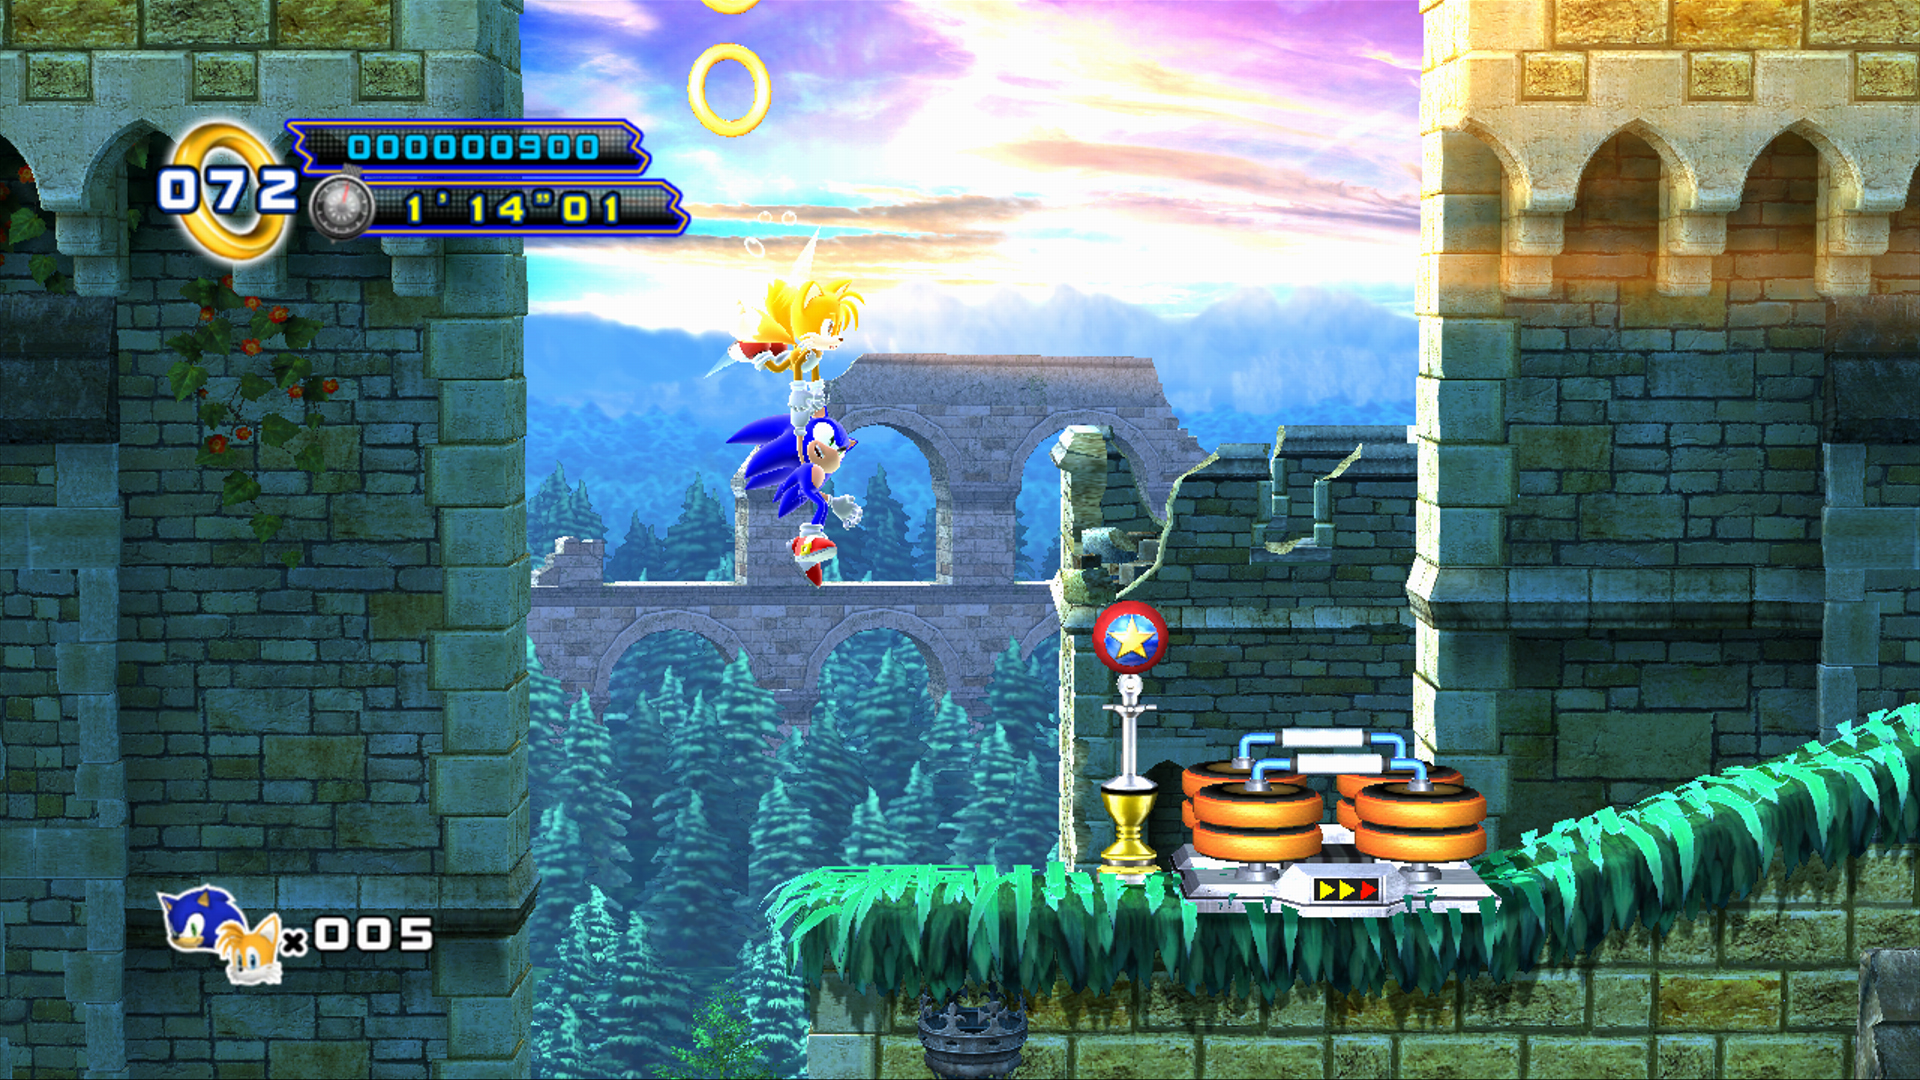 Sonic the Hedgehog 4 Episode II available today, we go hands-on - Android  Community